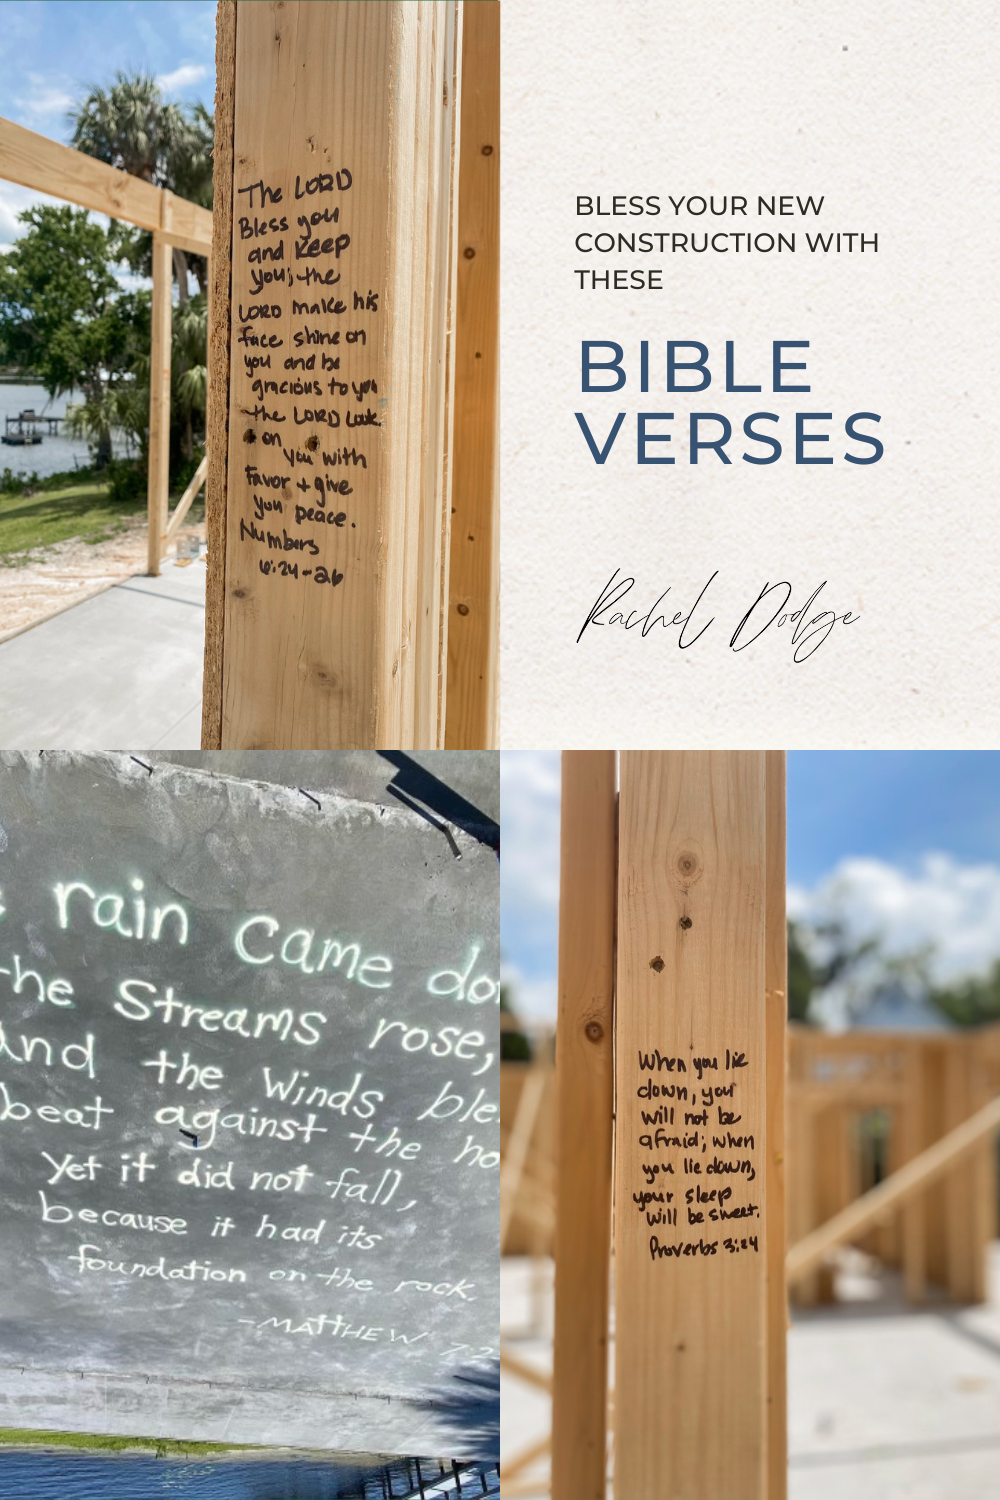 Bless Your New Construction with these Bible Verses pin